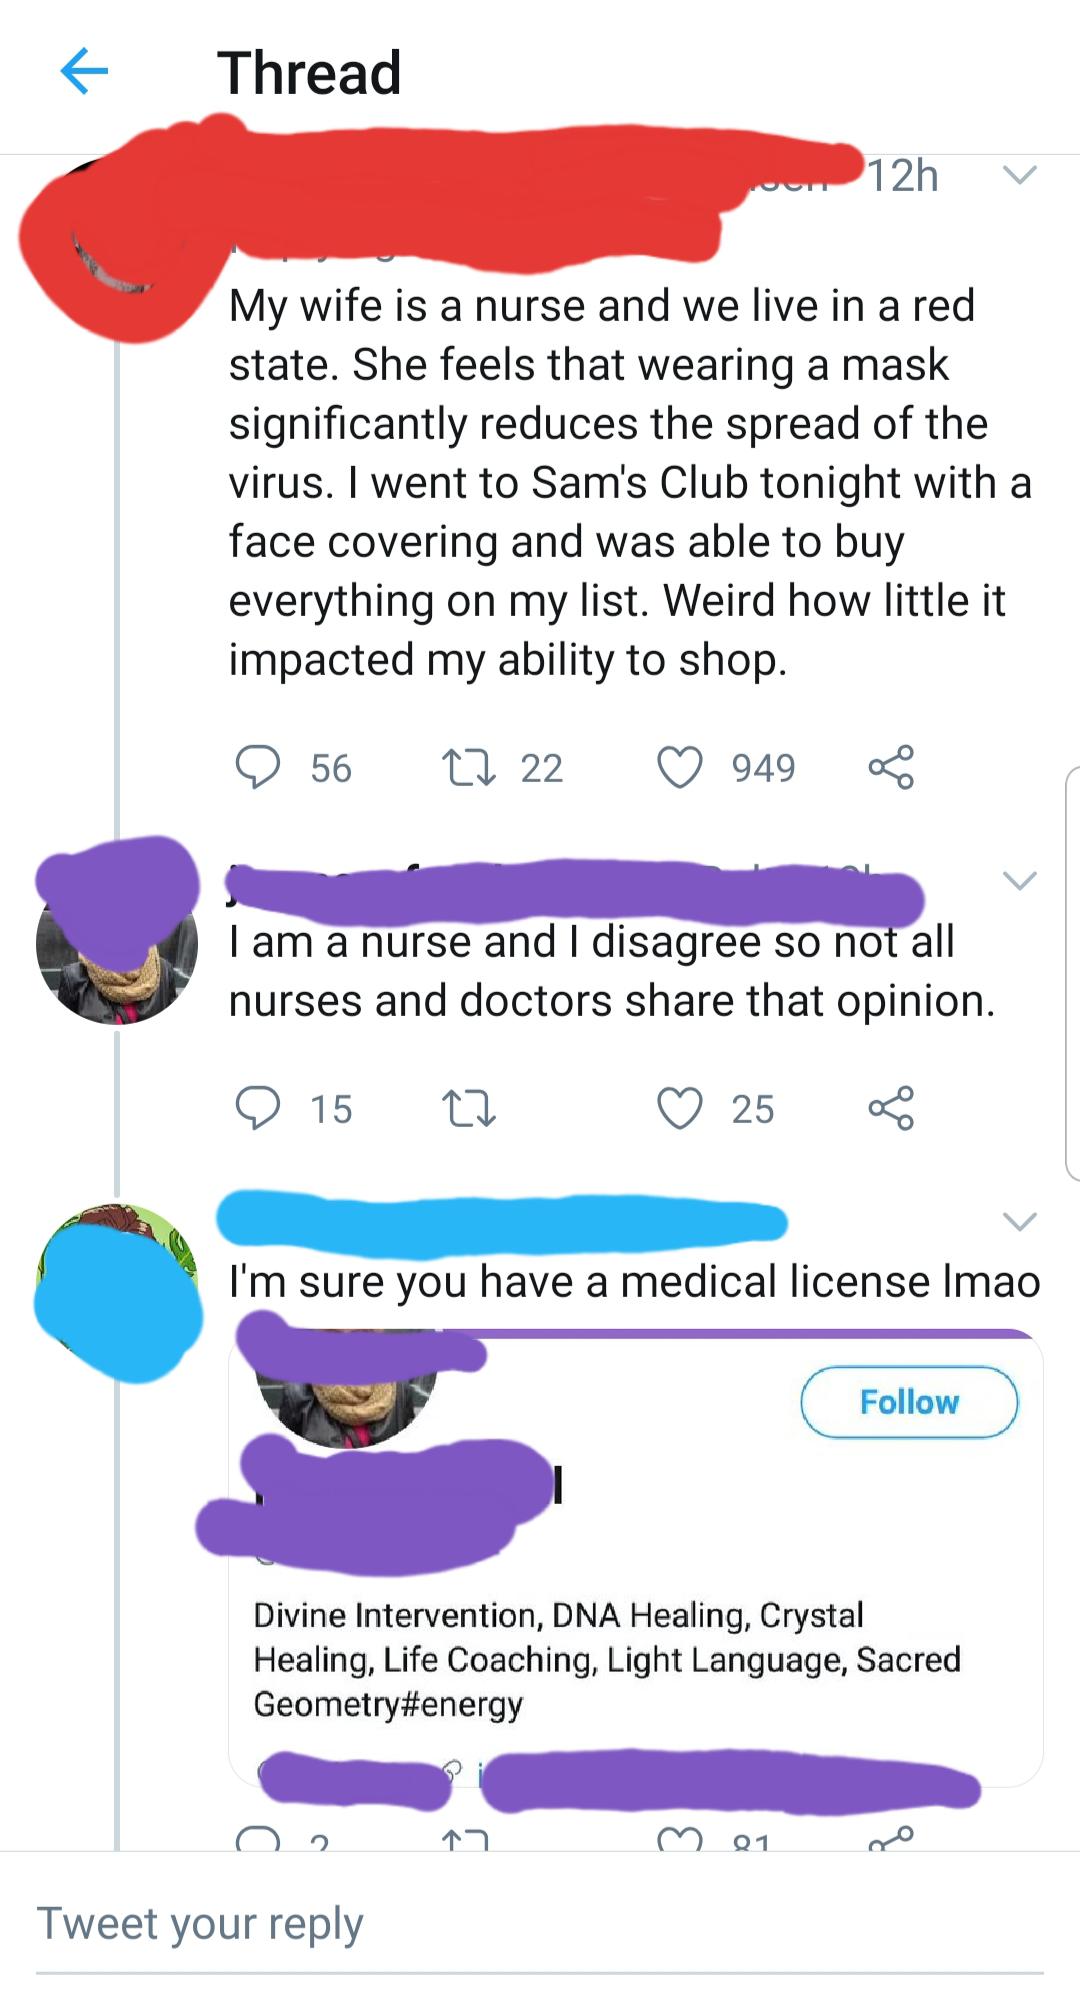 xavier facebook comments meme - K Thread 12h My wife is a nurse and we live in a red state. She feels that wearing a mask significantly reduces the spread of the virus. I went to Sam's Club tonight with a face covering and was able to buy everything on my